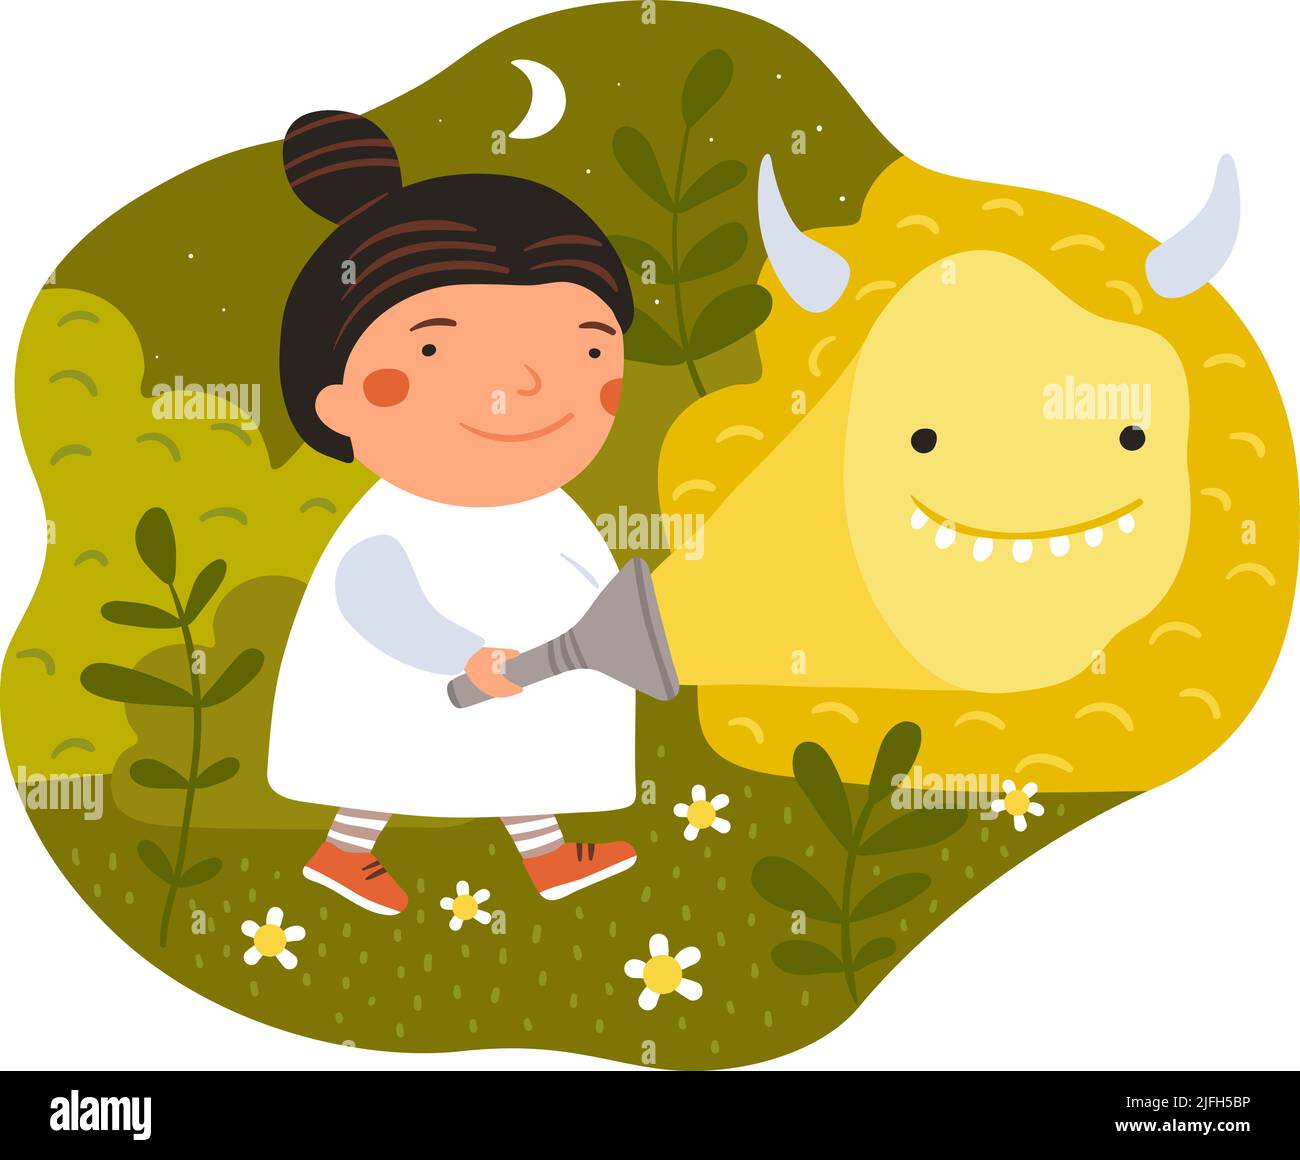 Children dreams. Little dreamer with fictional friend. Monster and kid walking in night forest. Bizarre animal. Imaginary creature. Happy girl with Stock Vector